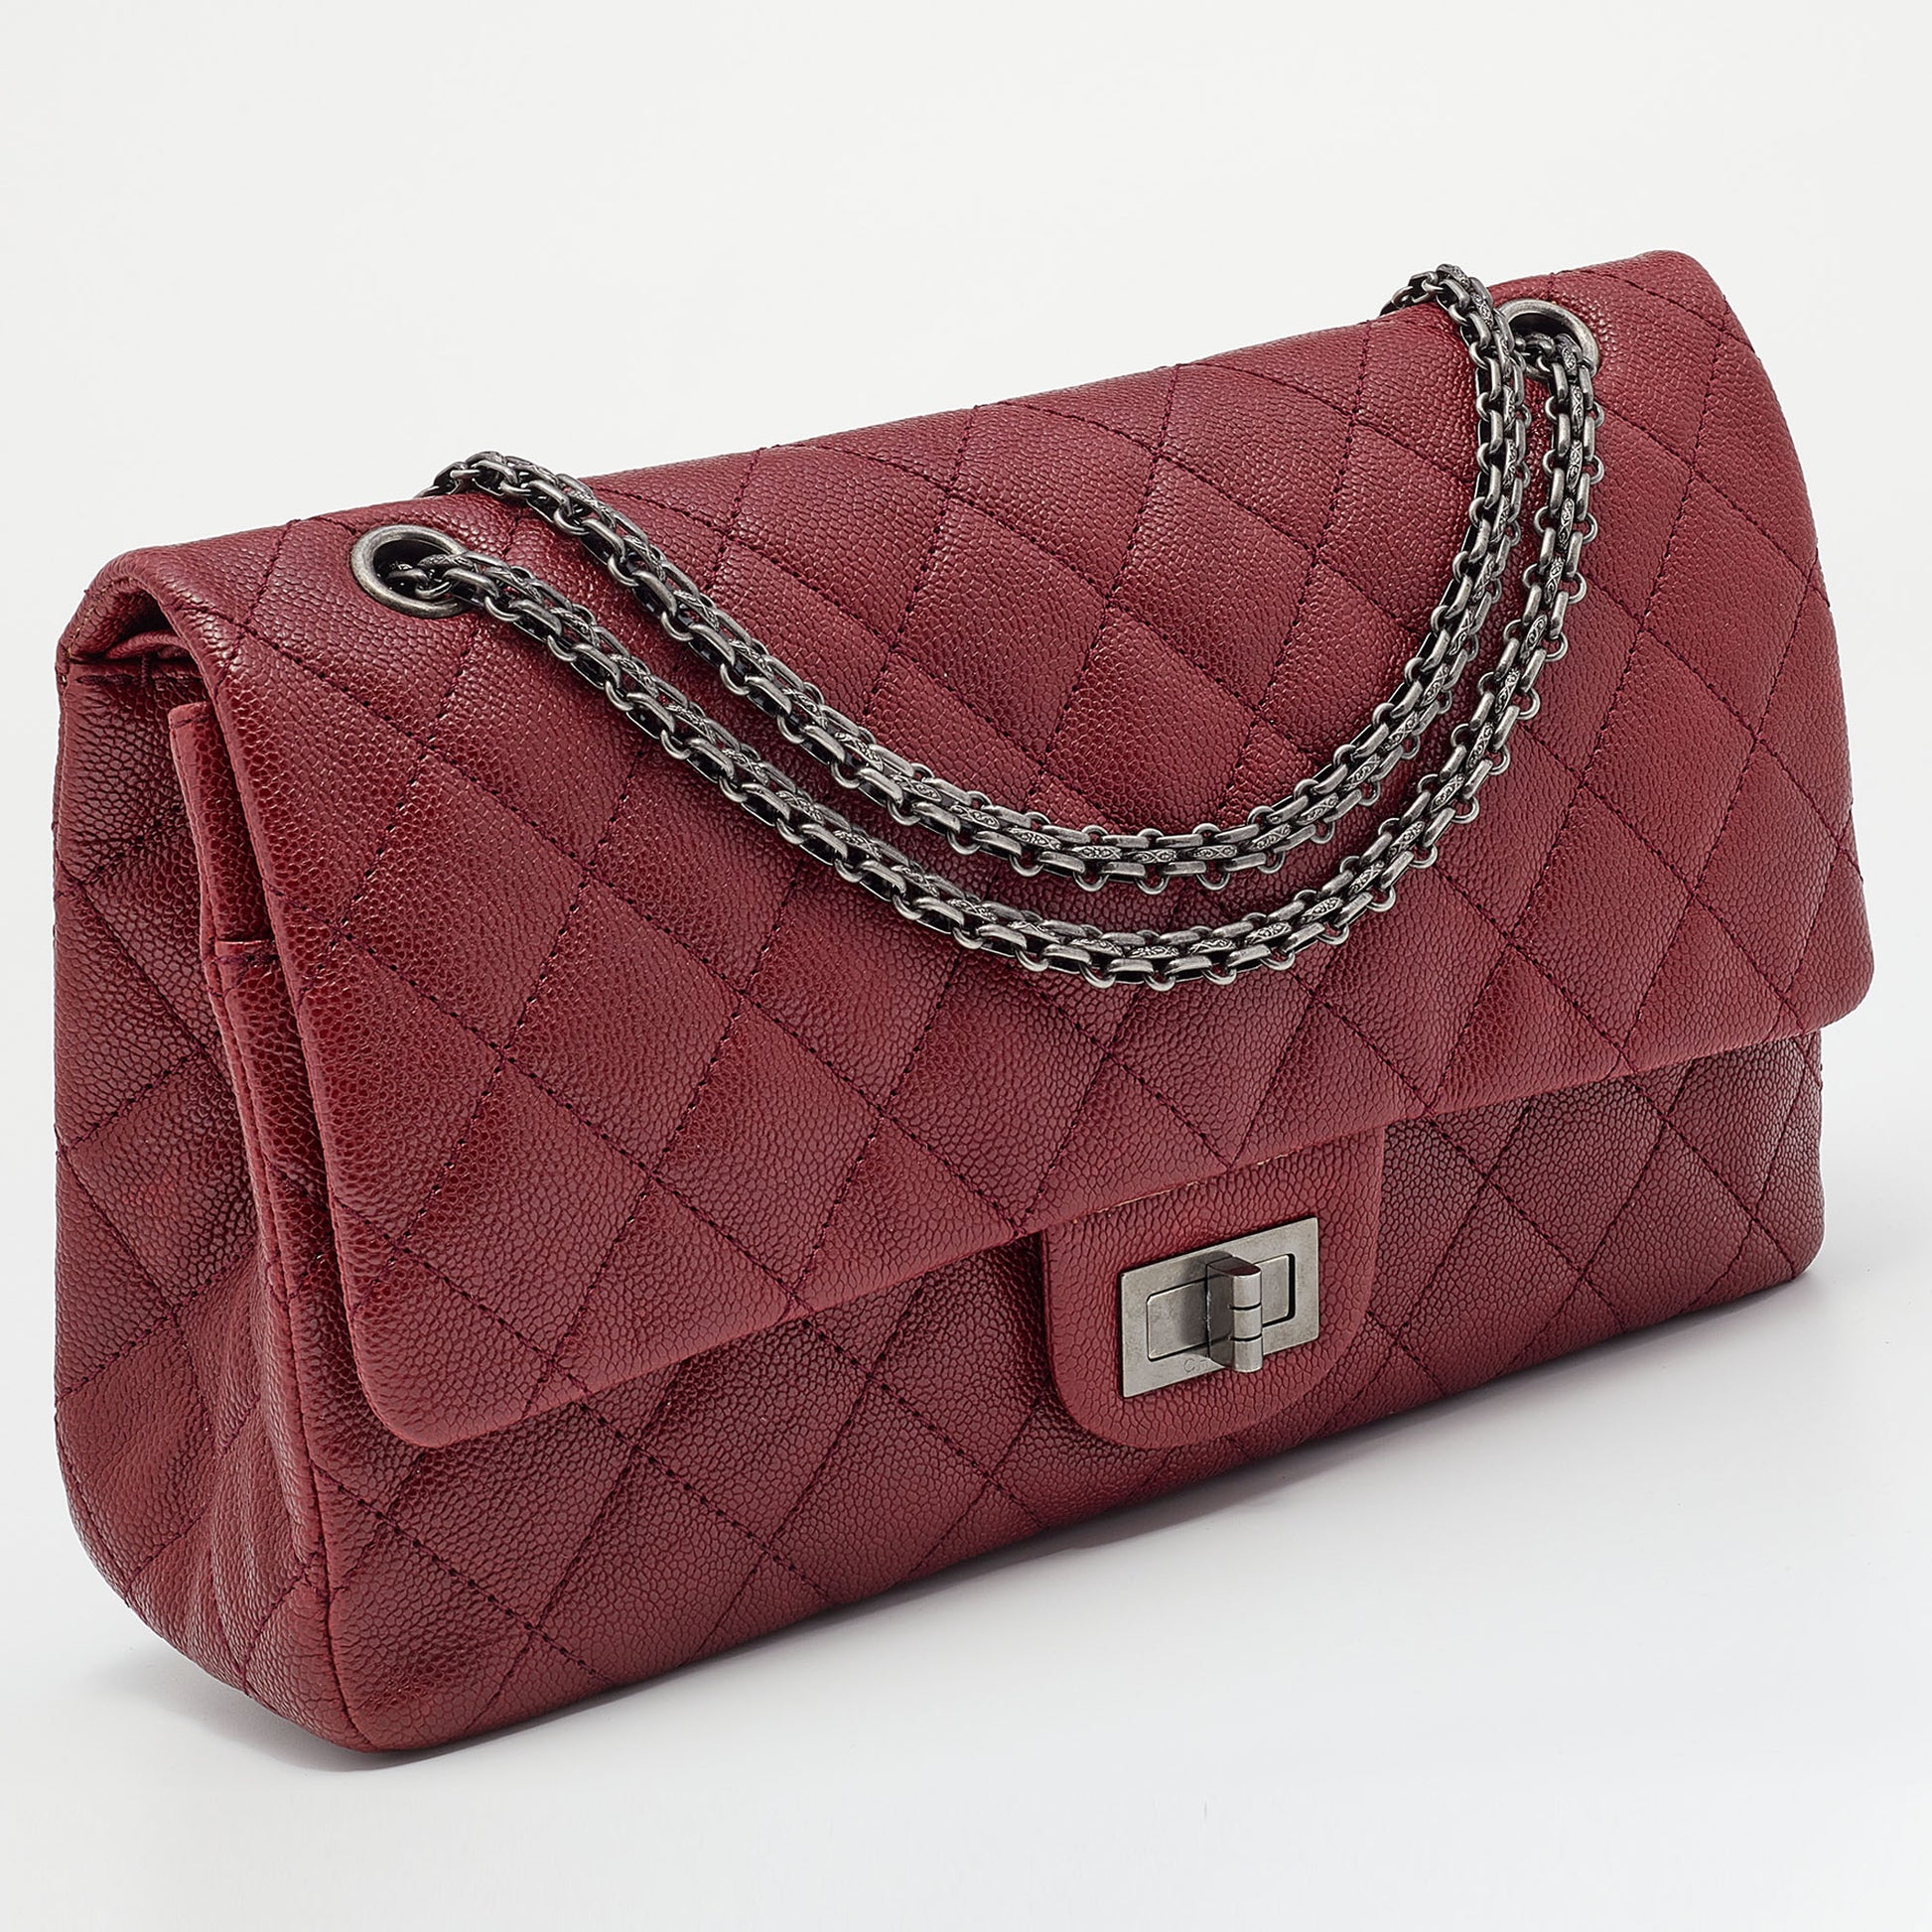 Chanel Red Quilted Caviar Leather Jumbo Reissue 2.55 Classic 227 Doubl